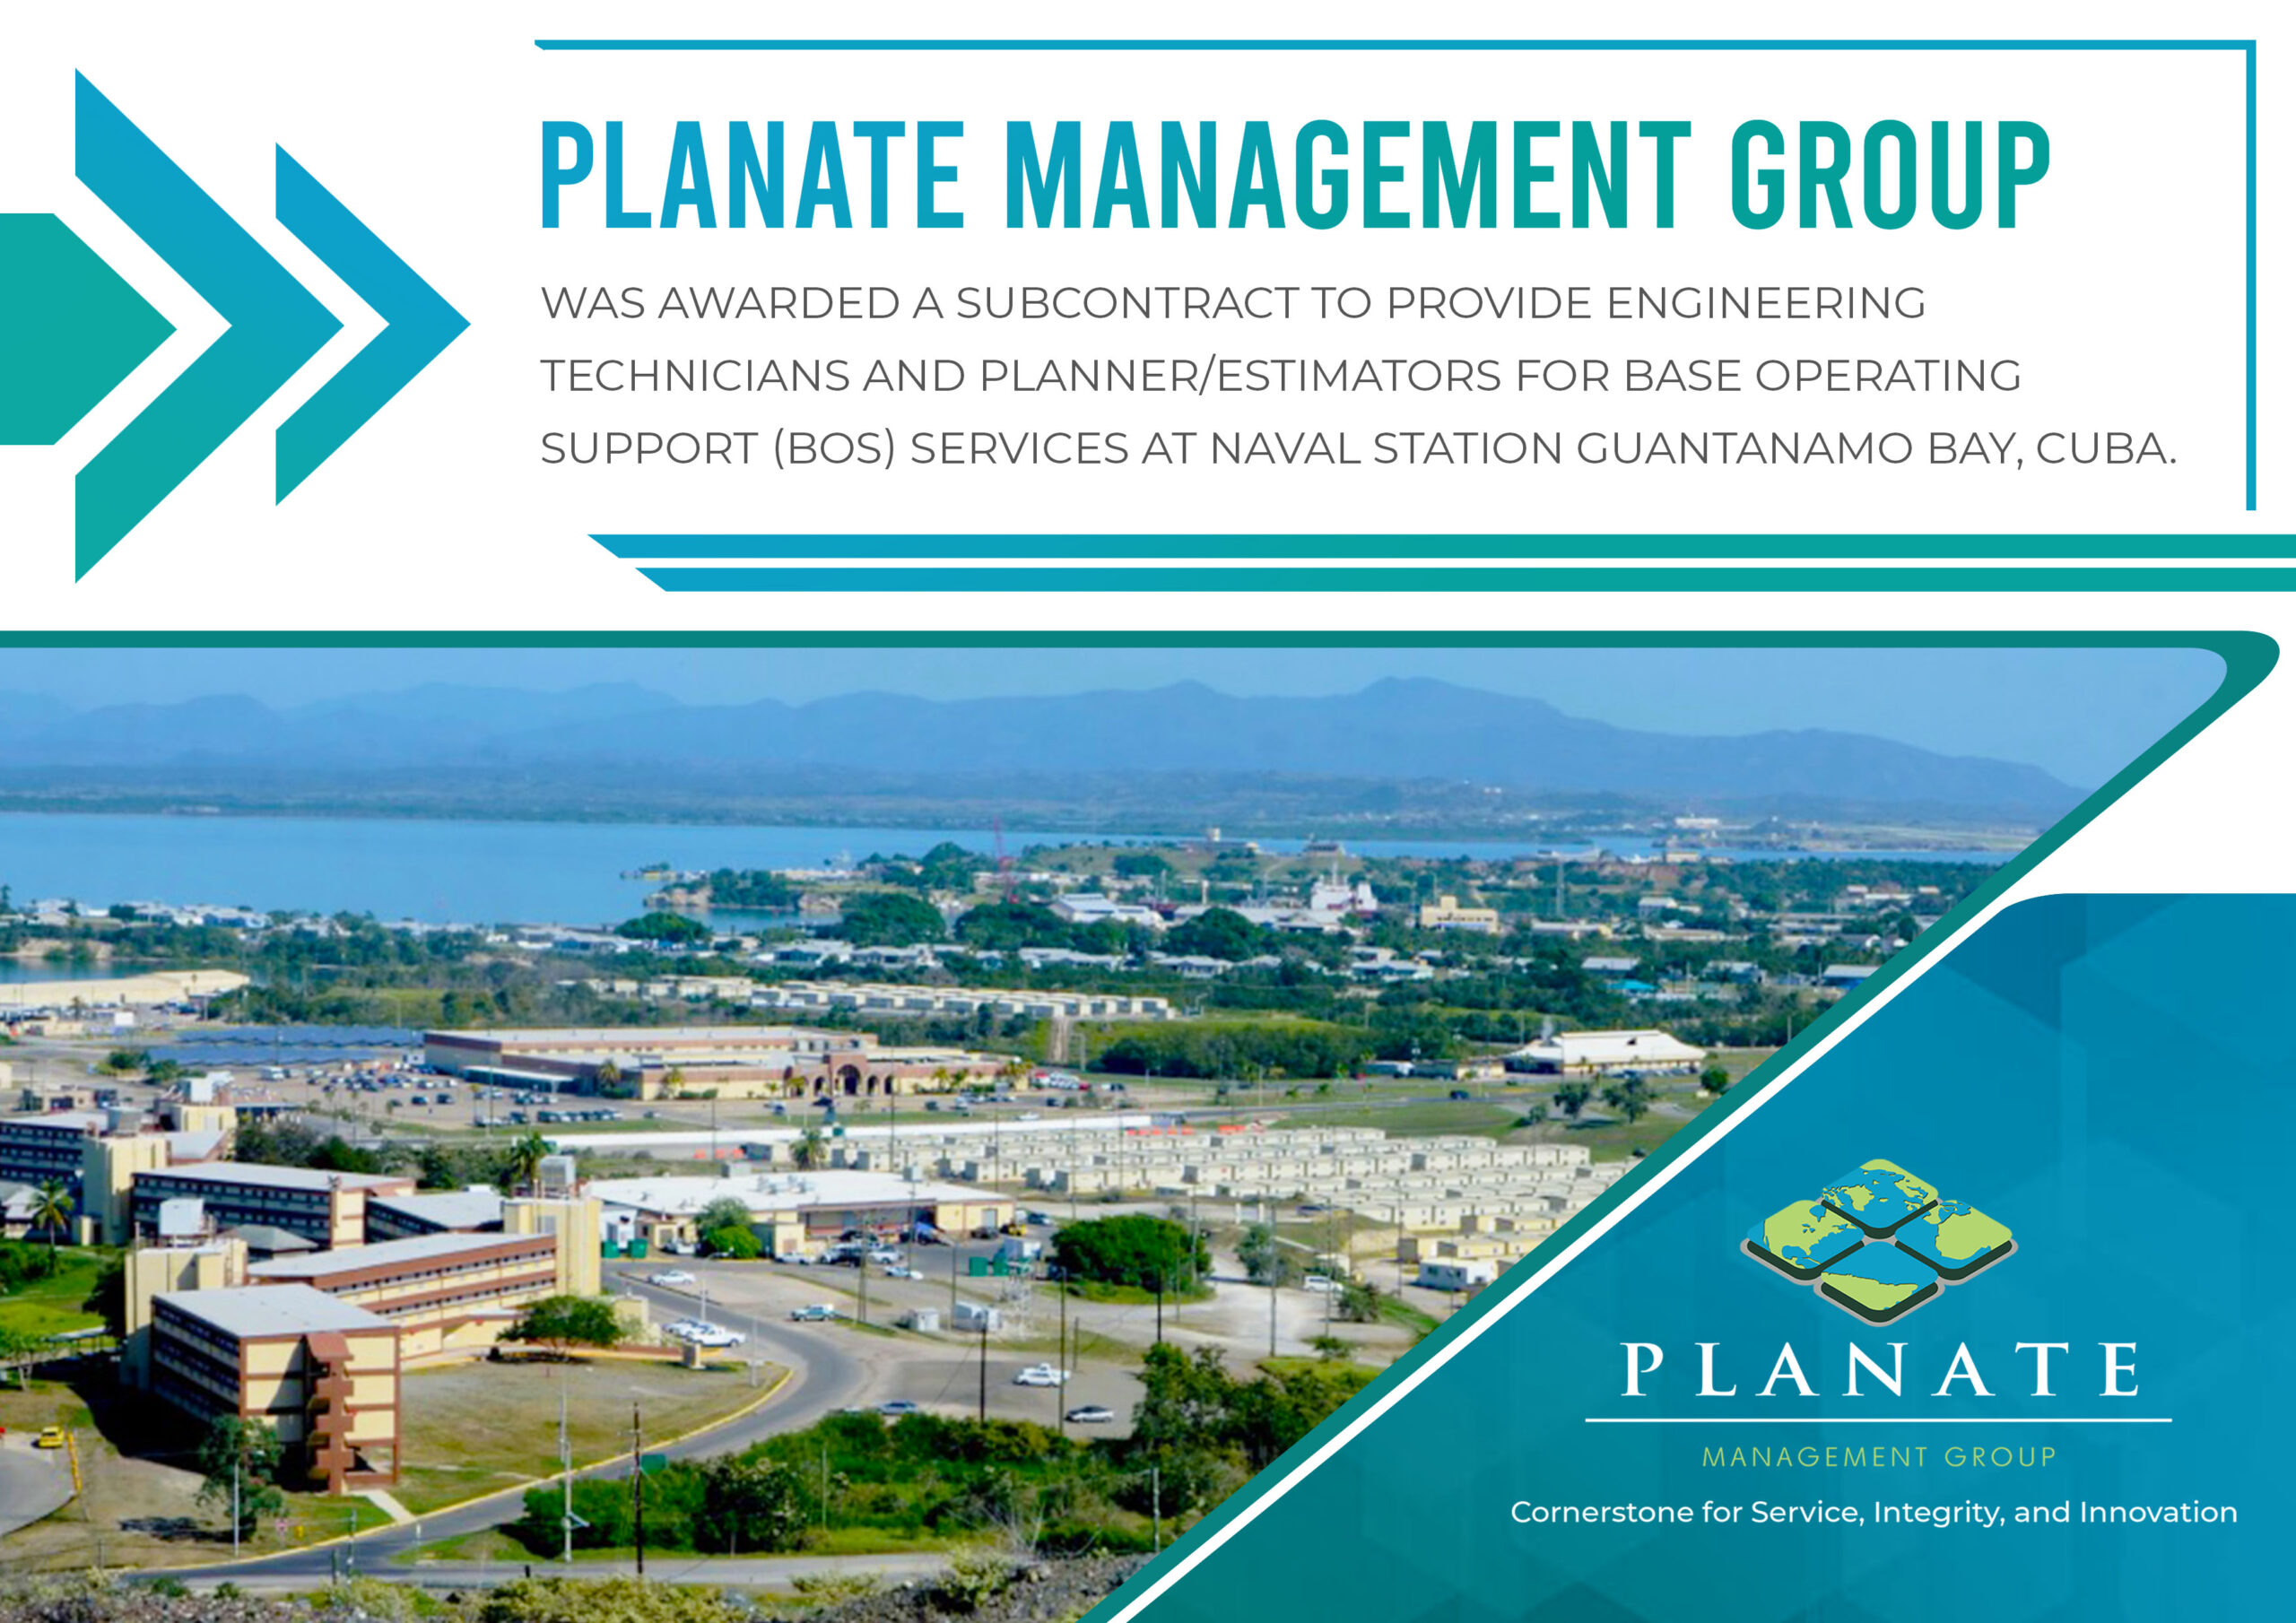 Planate Management Group Awarded A Subcontract Provide Technicians And Planner/Estimators For Base Operating Support (BOS) Services At Naval Station Guantanamo Bay, Cuba - Planate Management Group